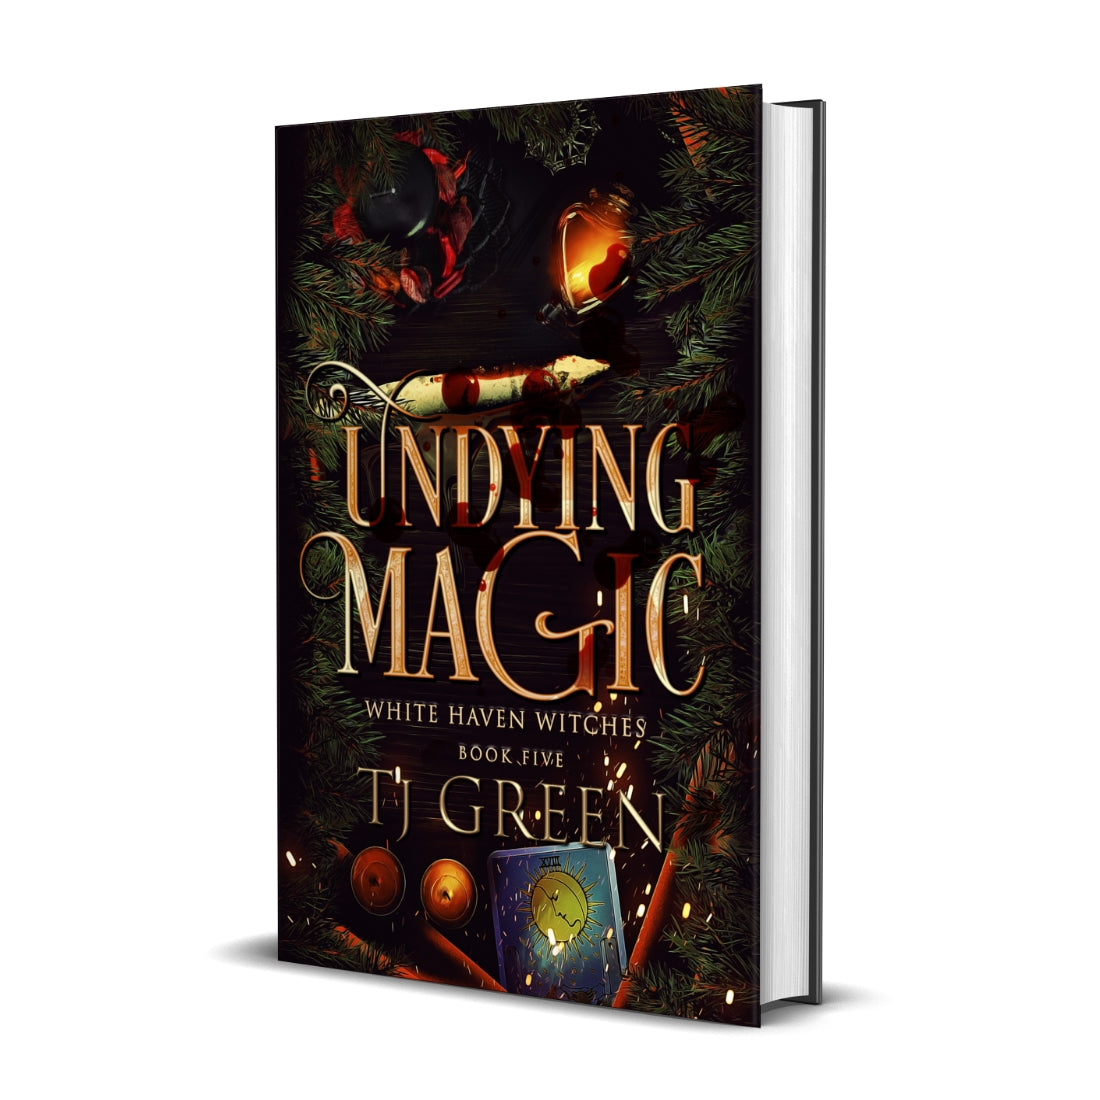 Undying Magic, White Haven Witches, urban fantasy and paranormal mystery